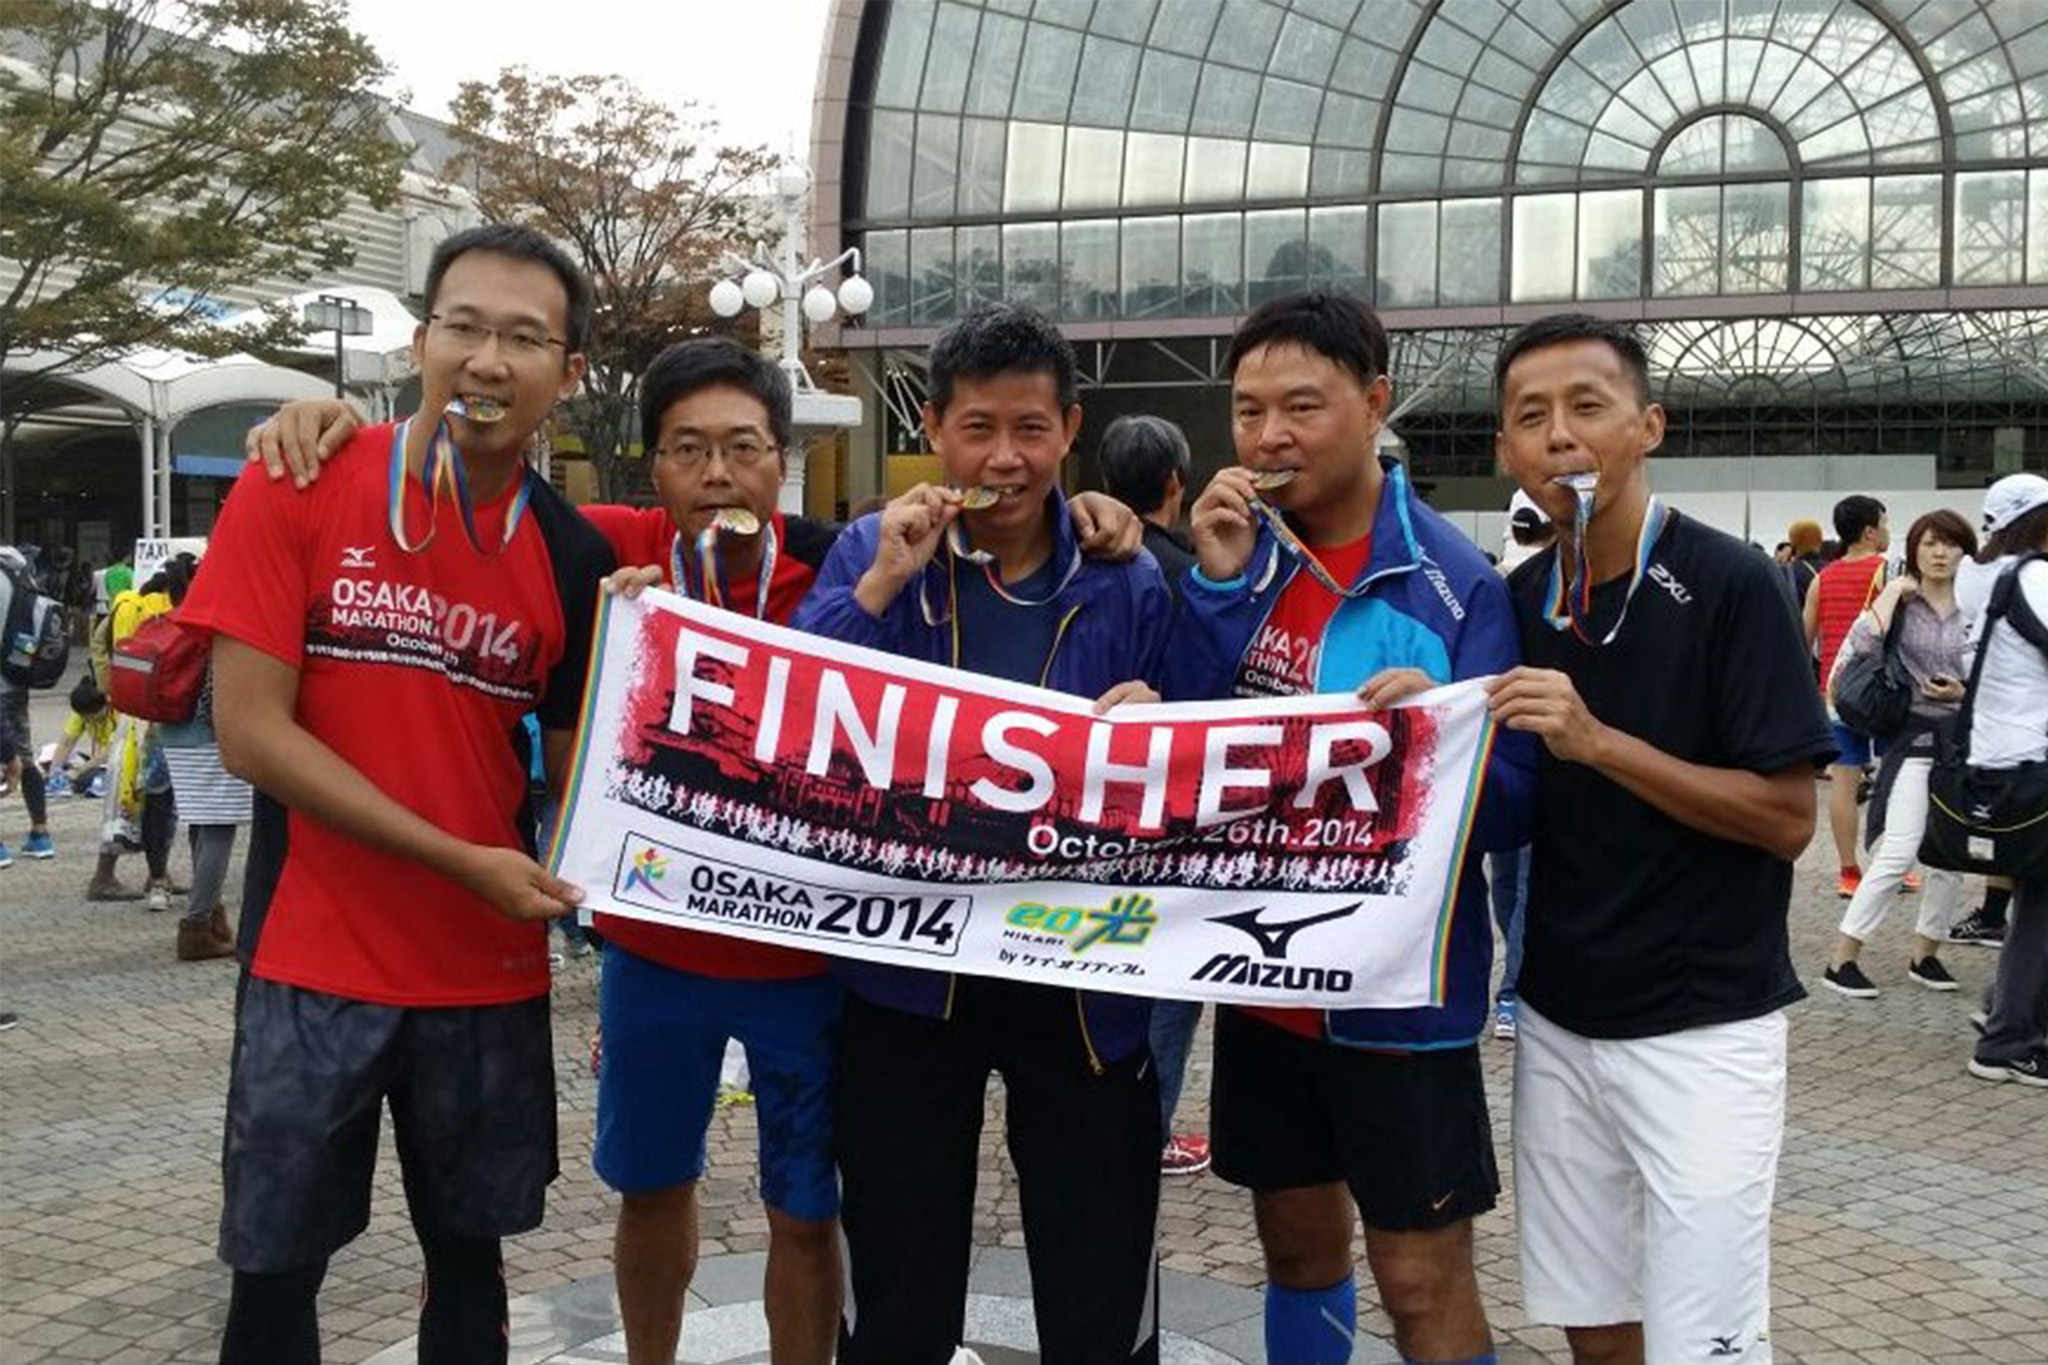 Despite being inexperienced as a runner, Andrew (1st from left) was inspired by fellow HKBN teammates and friends to complete his first full marathon in Osaka, Japan.
